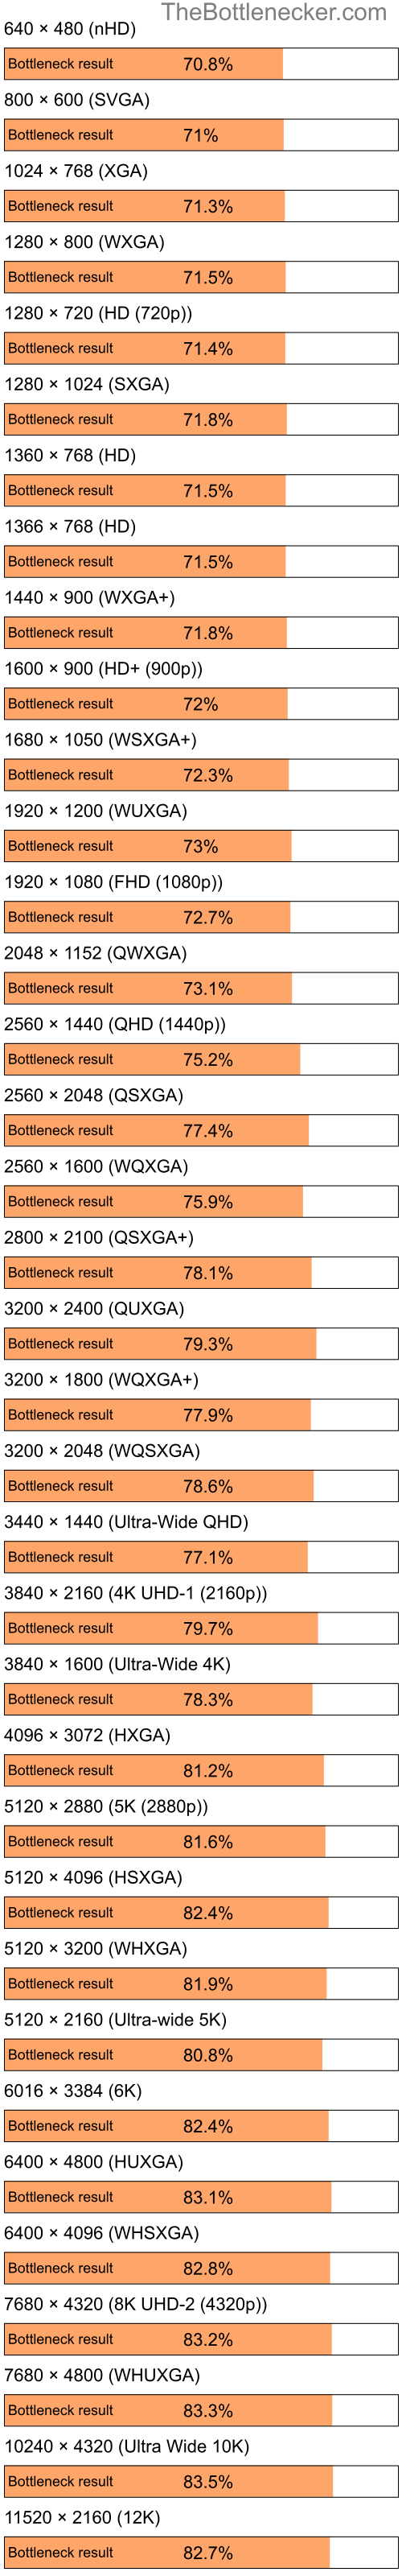 Bottleneck results by resolution for Intel Celeron and NVIDIA nForce 720a in Graphic Card Intense Tasks